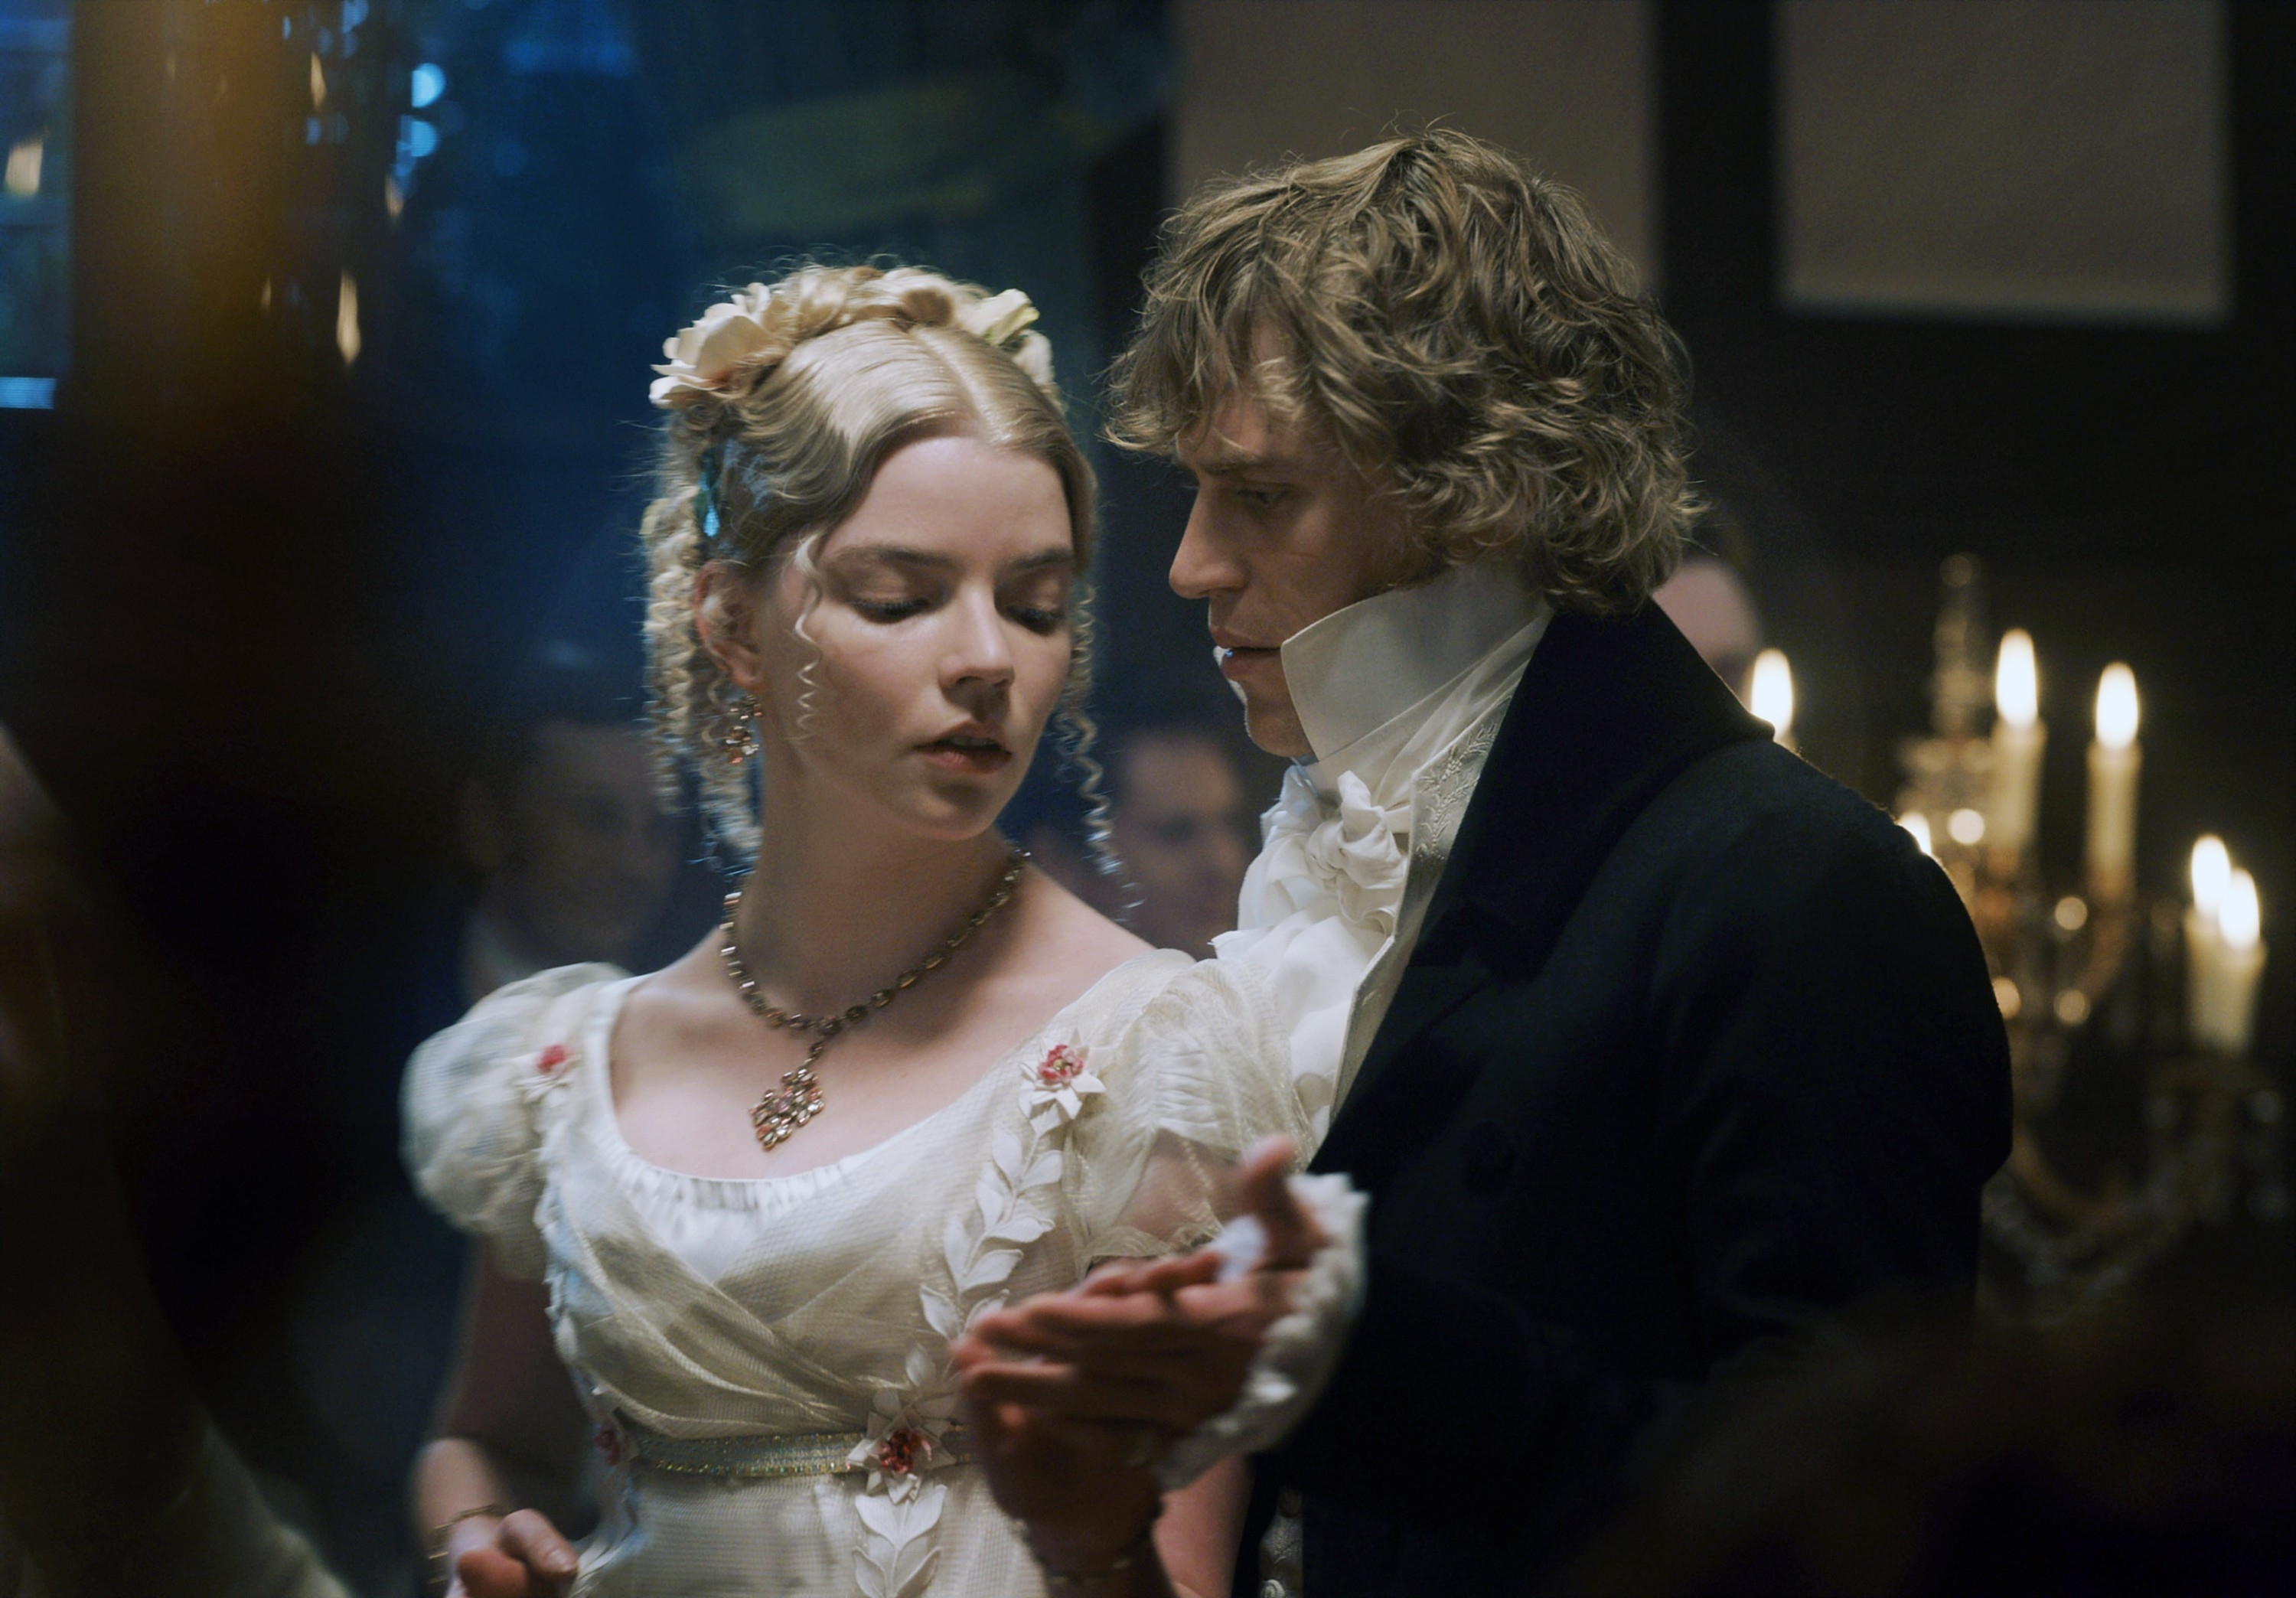 Anya Taylor-Joy and Johnny Flynn in period costume as characters from &#x27;Emma&#x27;, in a dance scene